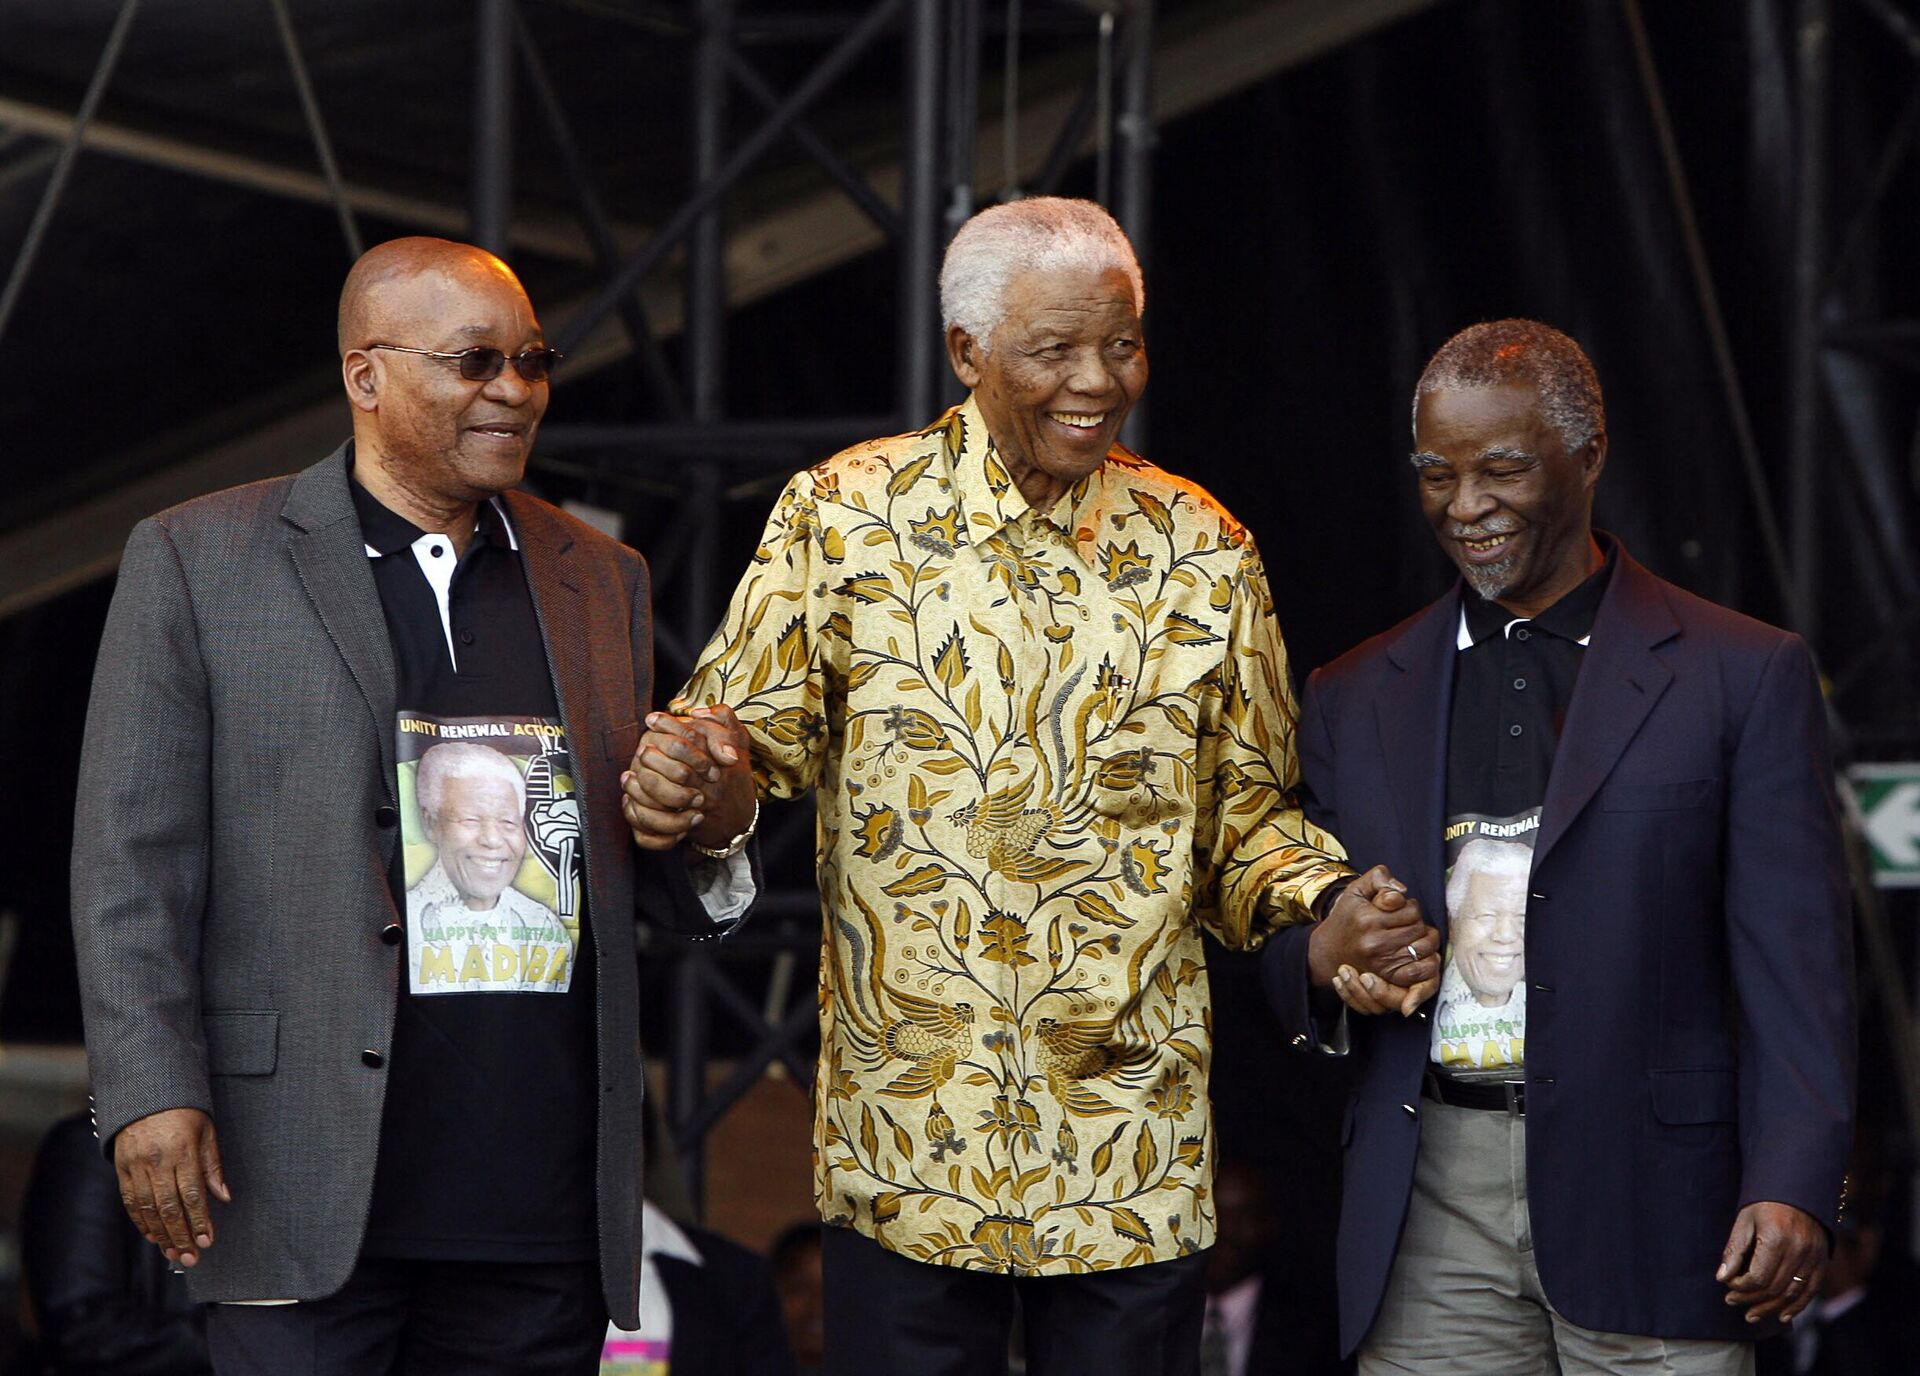 Former South African president and Nobel peace prize laureate Nelson Mandela (C) ANC president Jacob Zuma (L) and South African president Thabo Mbeki (R) arrive on August 02, 2008  on stage during the Mandela 90th birthday ANC celebration at Loftus stadium in Pretoria, South Africa. - Sputnik Africa, 1920, 05.12.2022